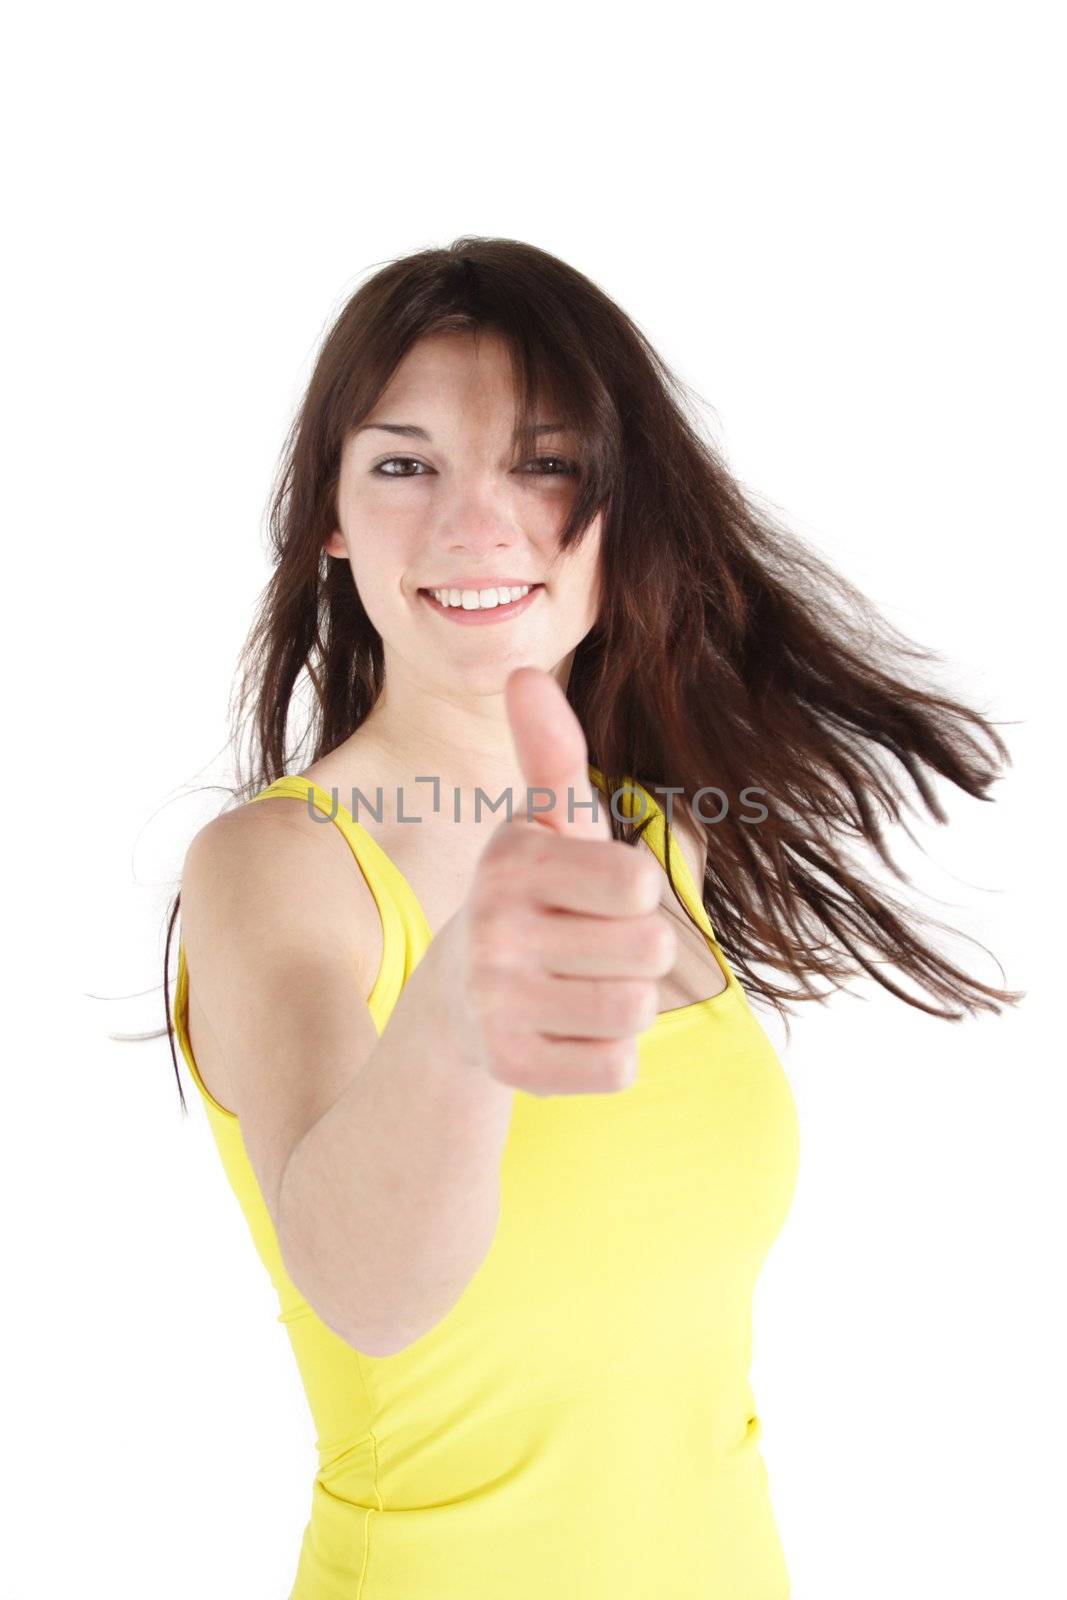 A handsome young woman praises someone. All on white background.